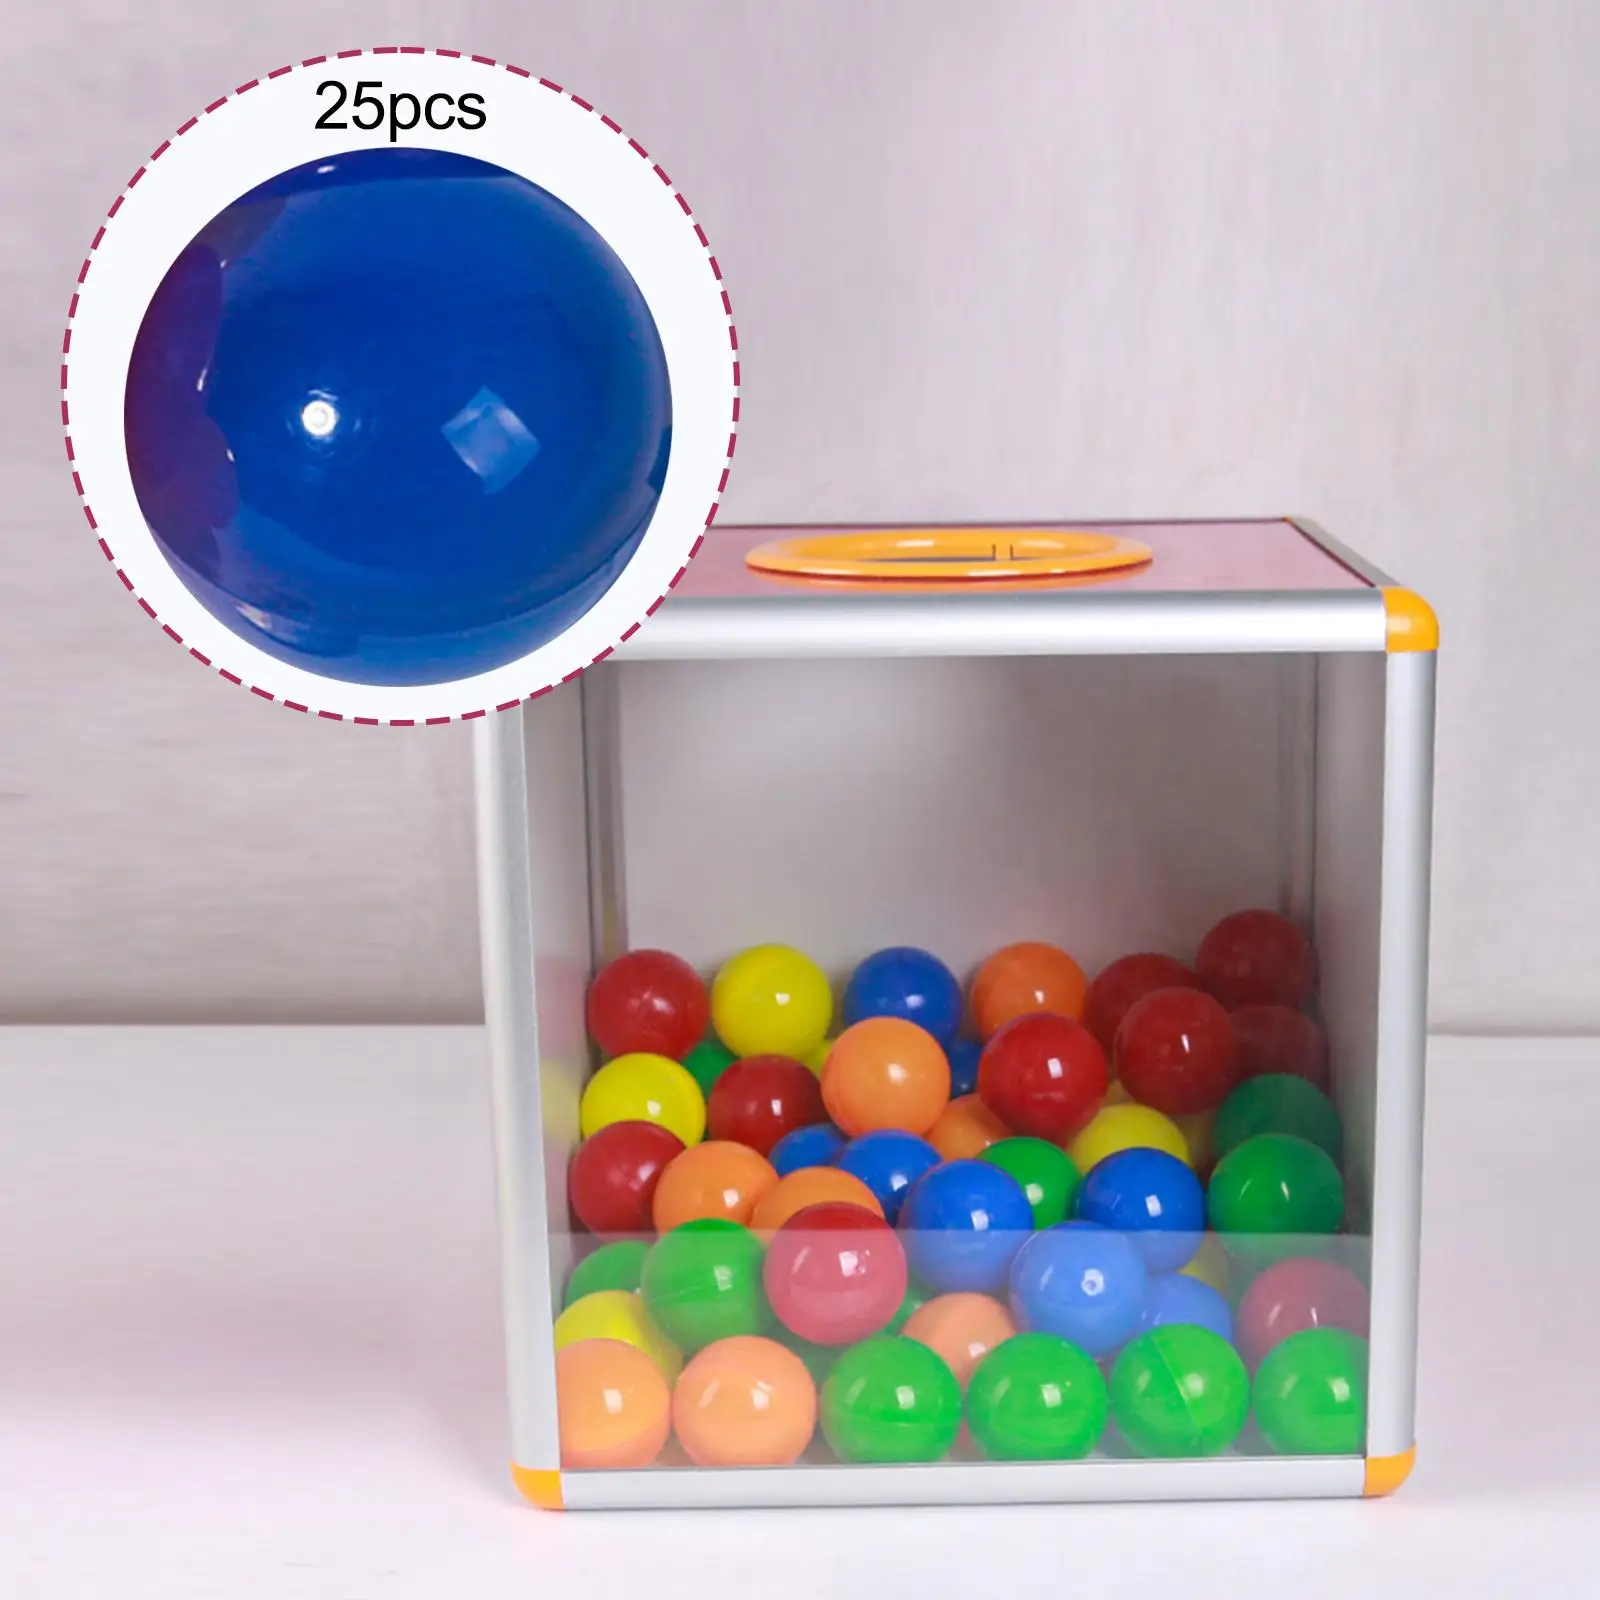 25Pcs Bingo Ball Replacement Parts Fittings Portable Opening Calling Balls for Office Large Group Games Nights Household Parties